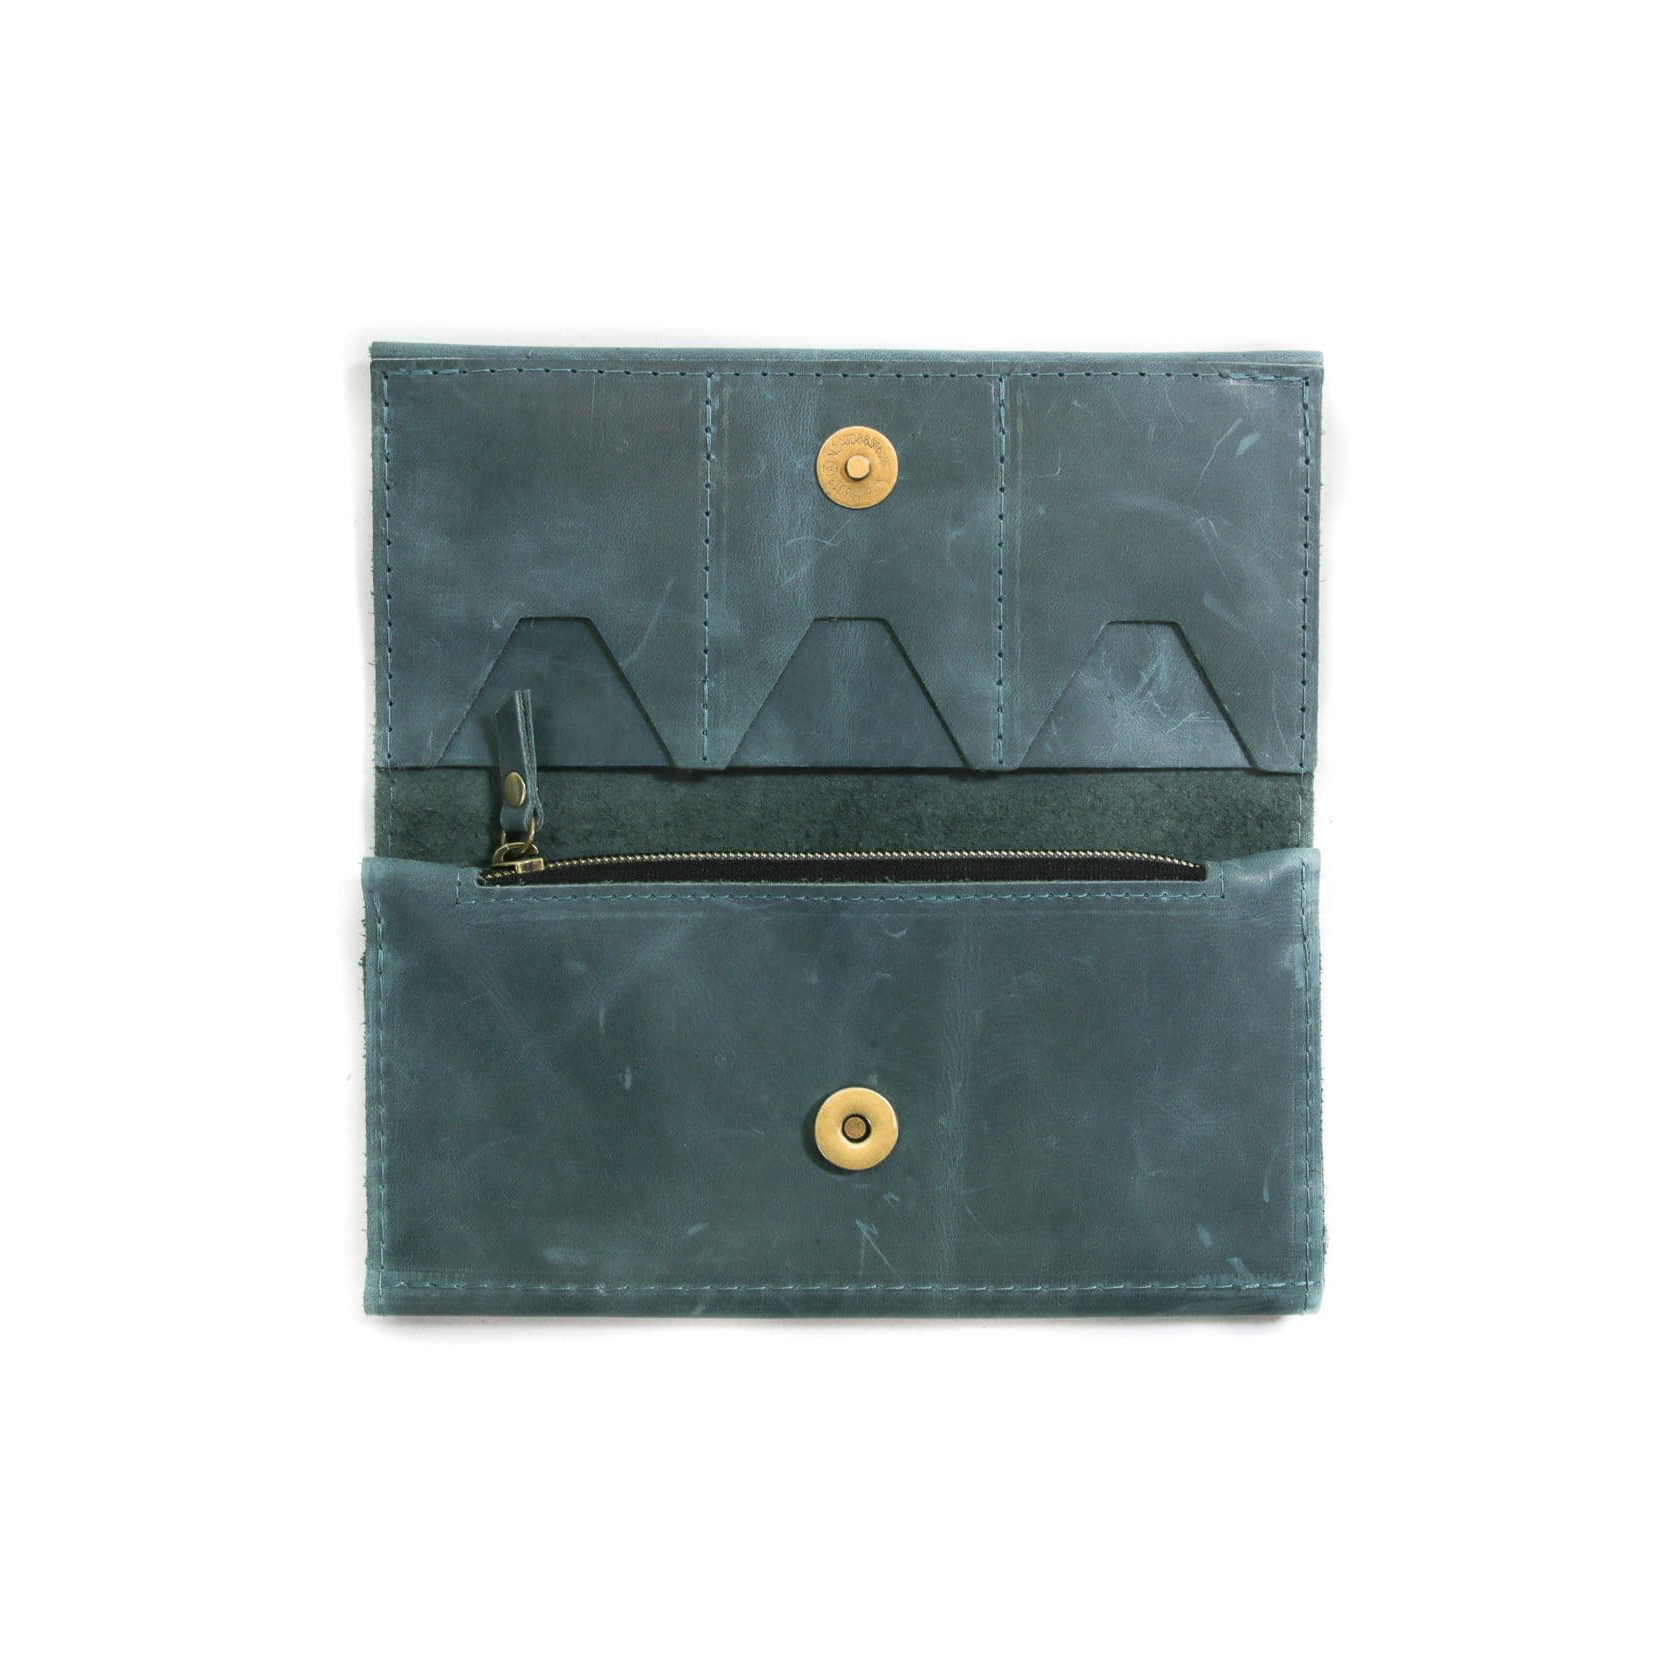 Small Leather Envelope Crossbody Purse Distressed Navy